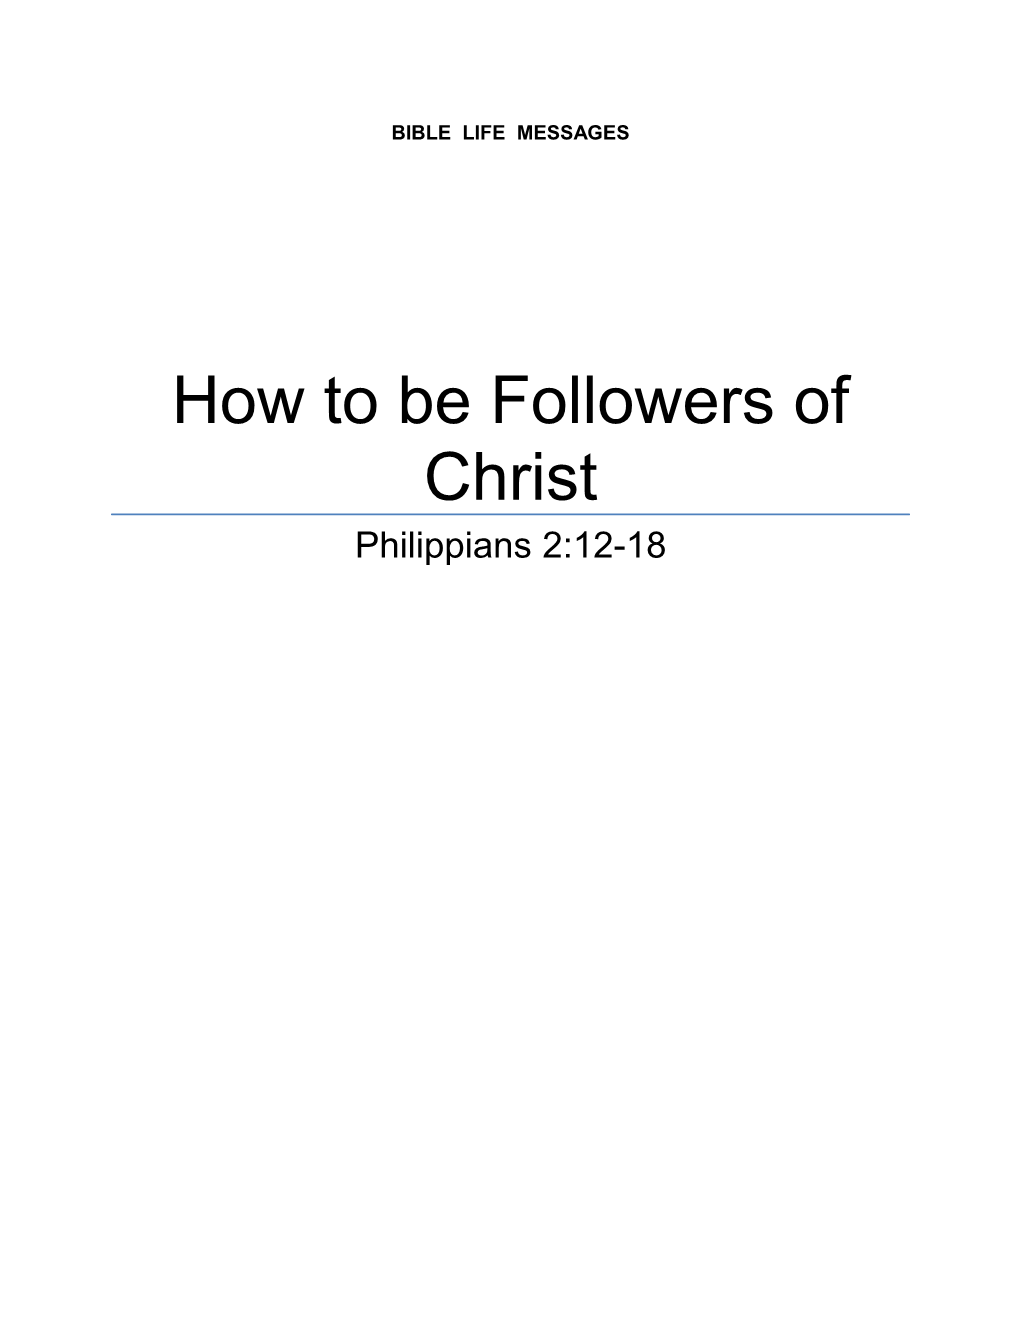 How to Be Followers of Christ